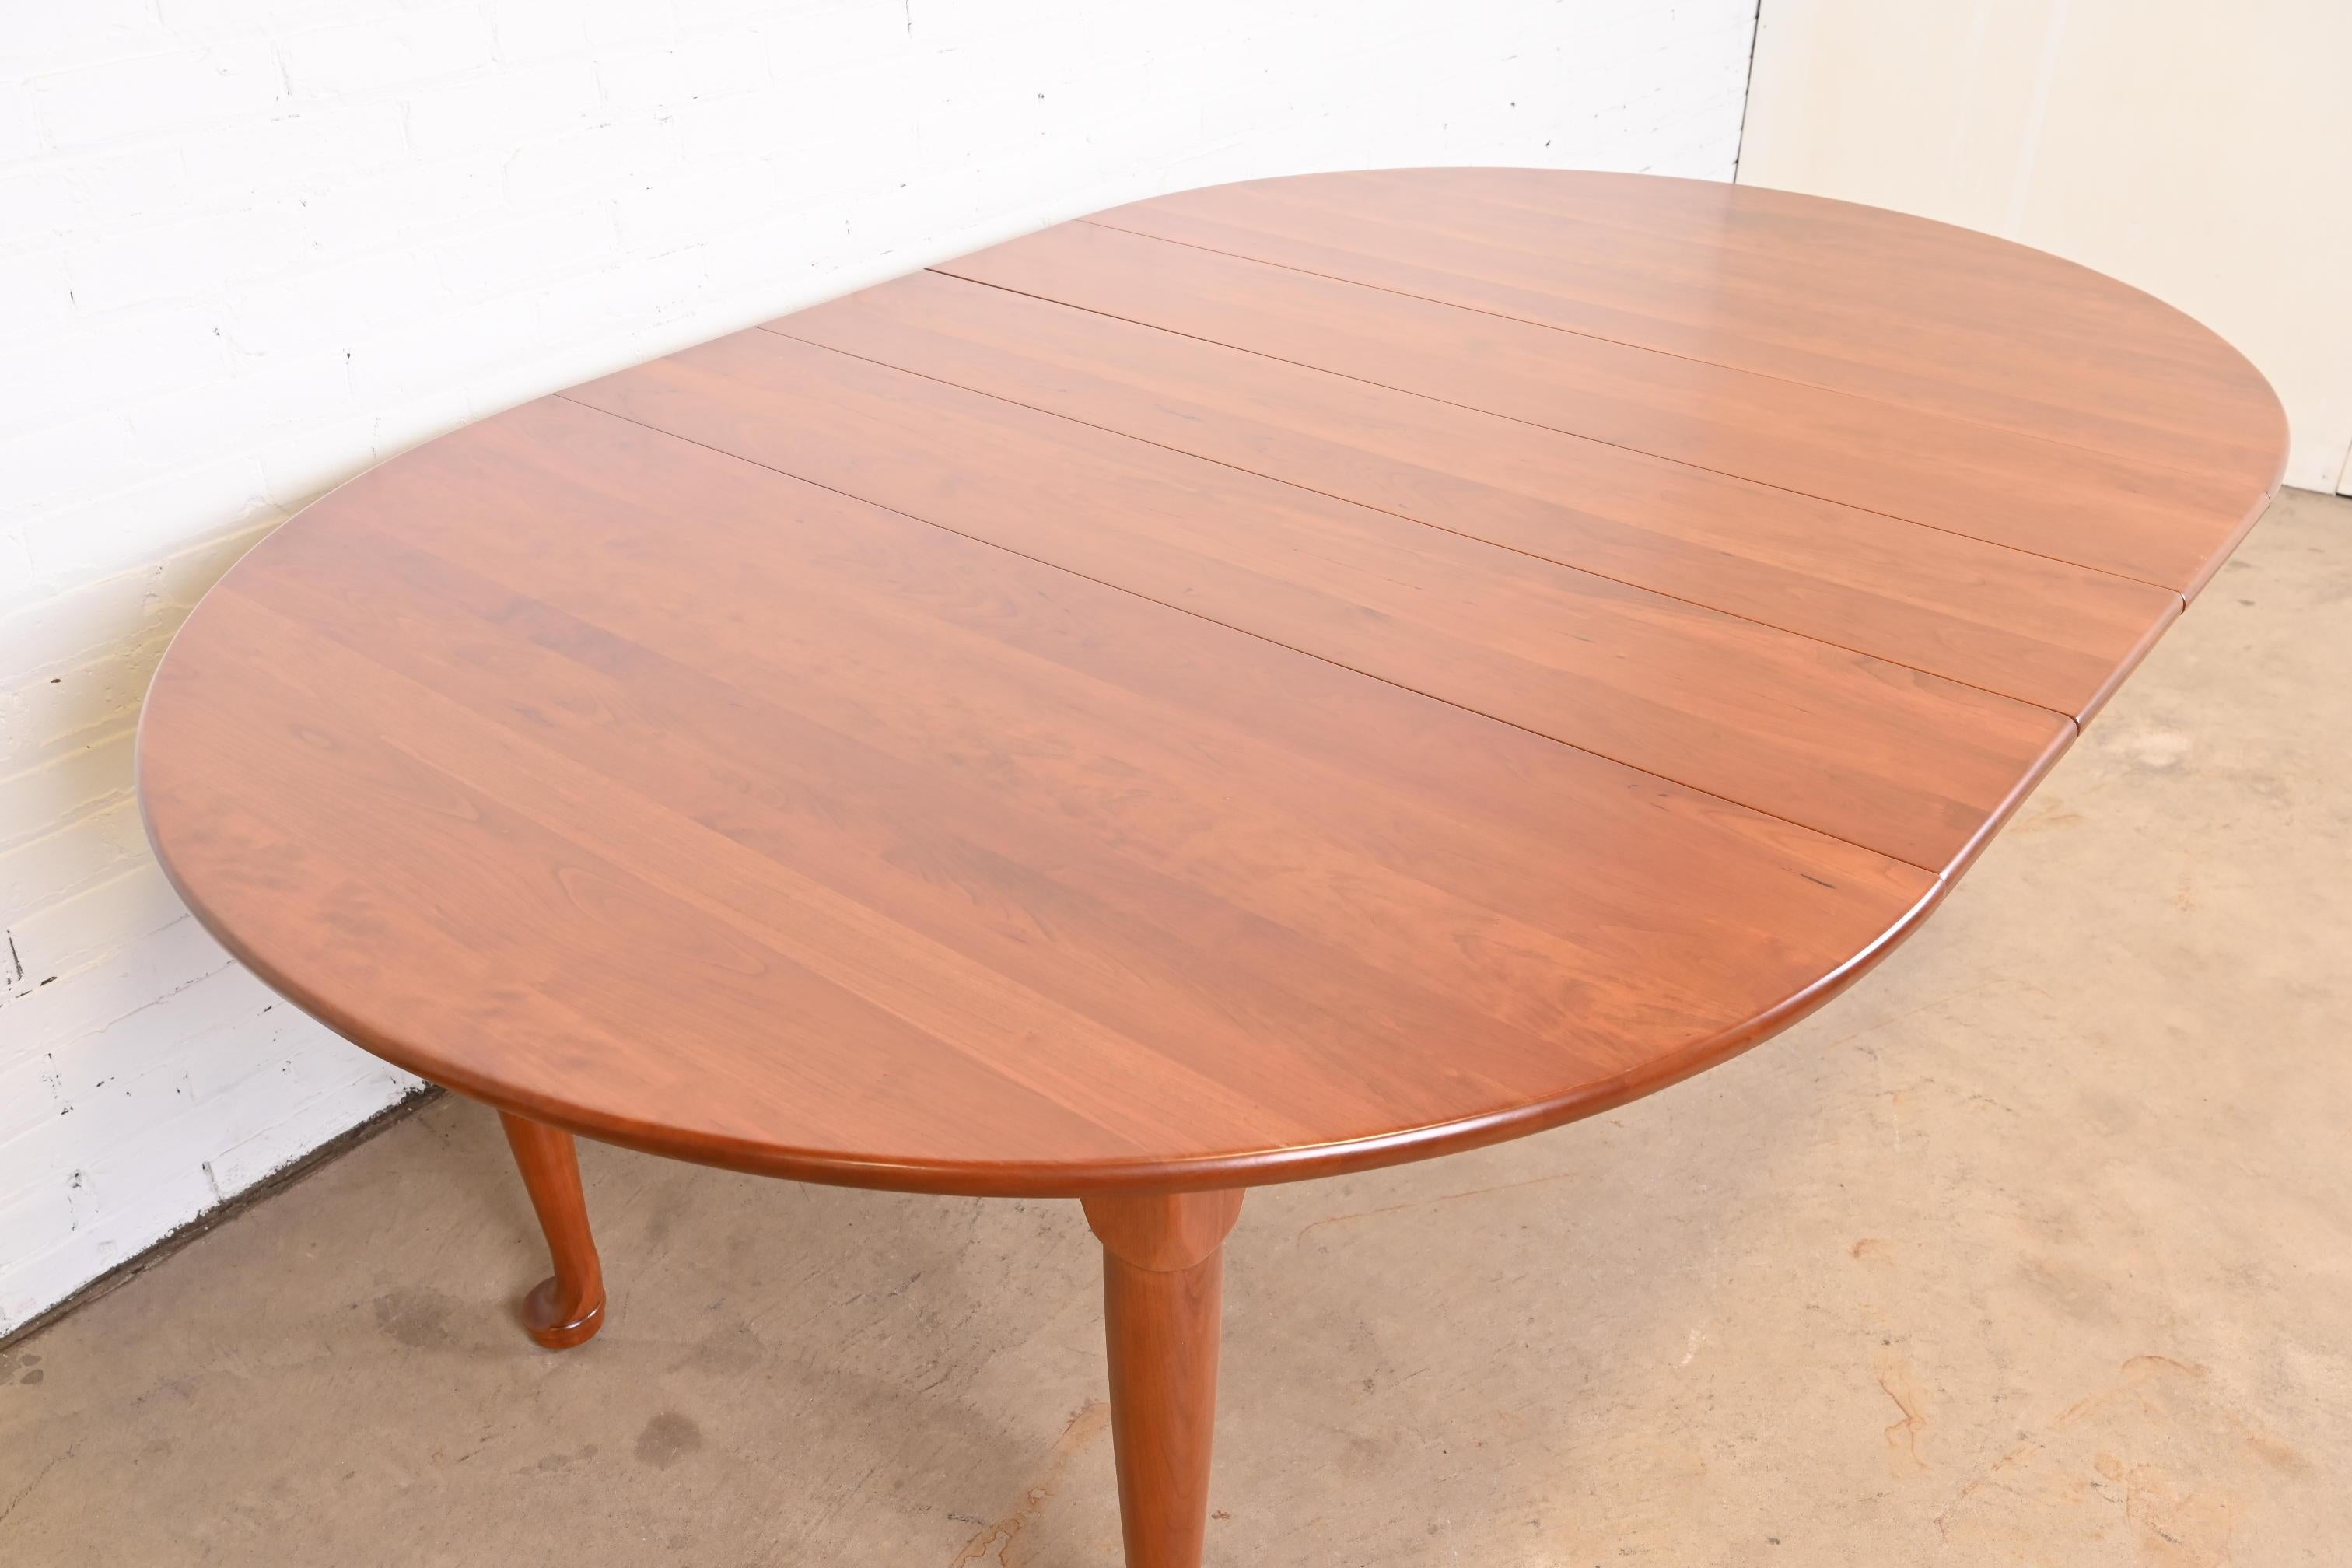 Mid-20th Century Stickley American Colonial Cherry Wood Extension Dining Table, Newly Refinished For Sale